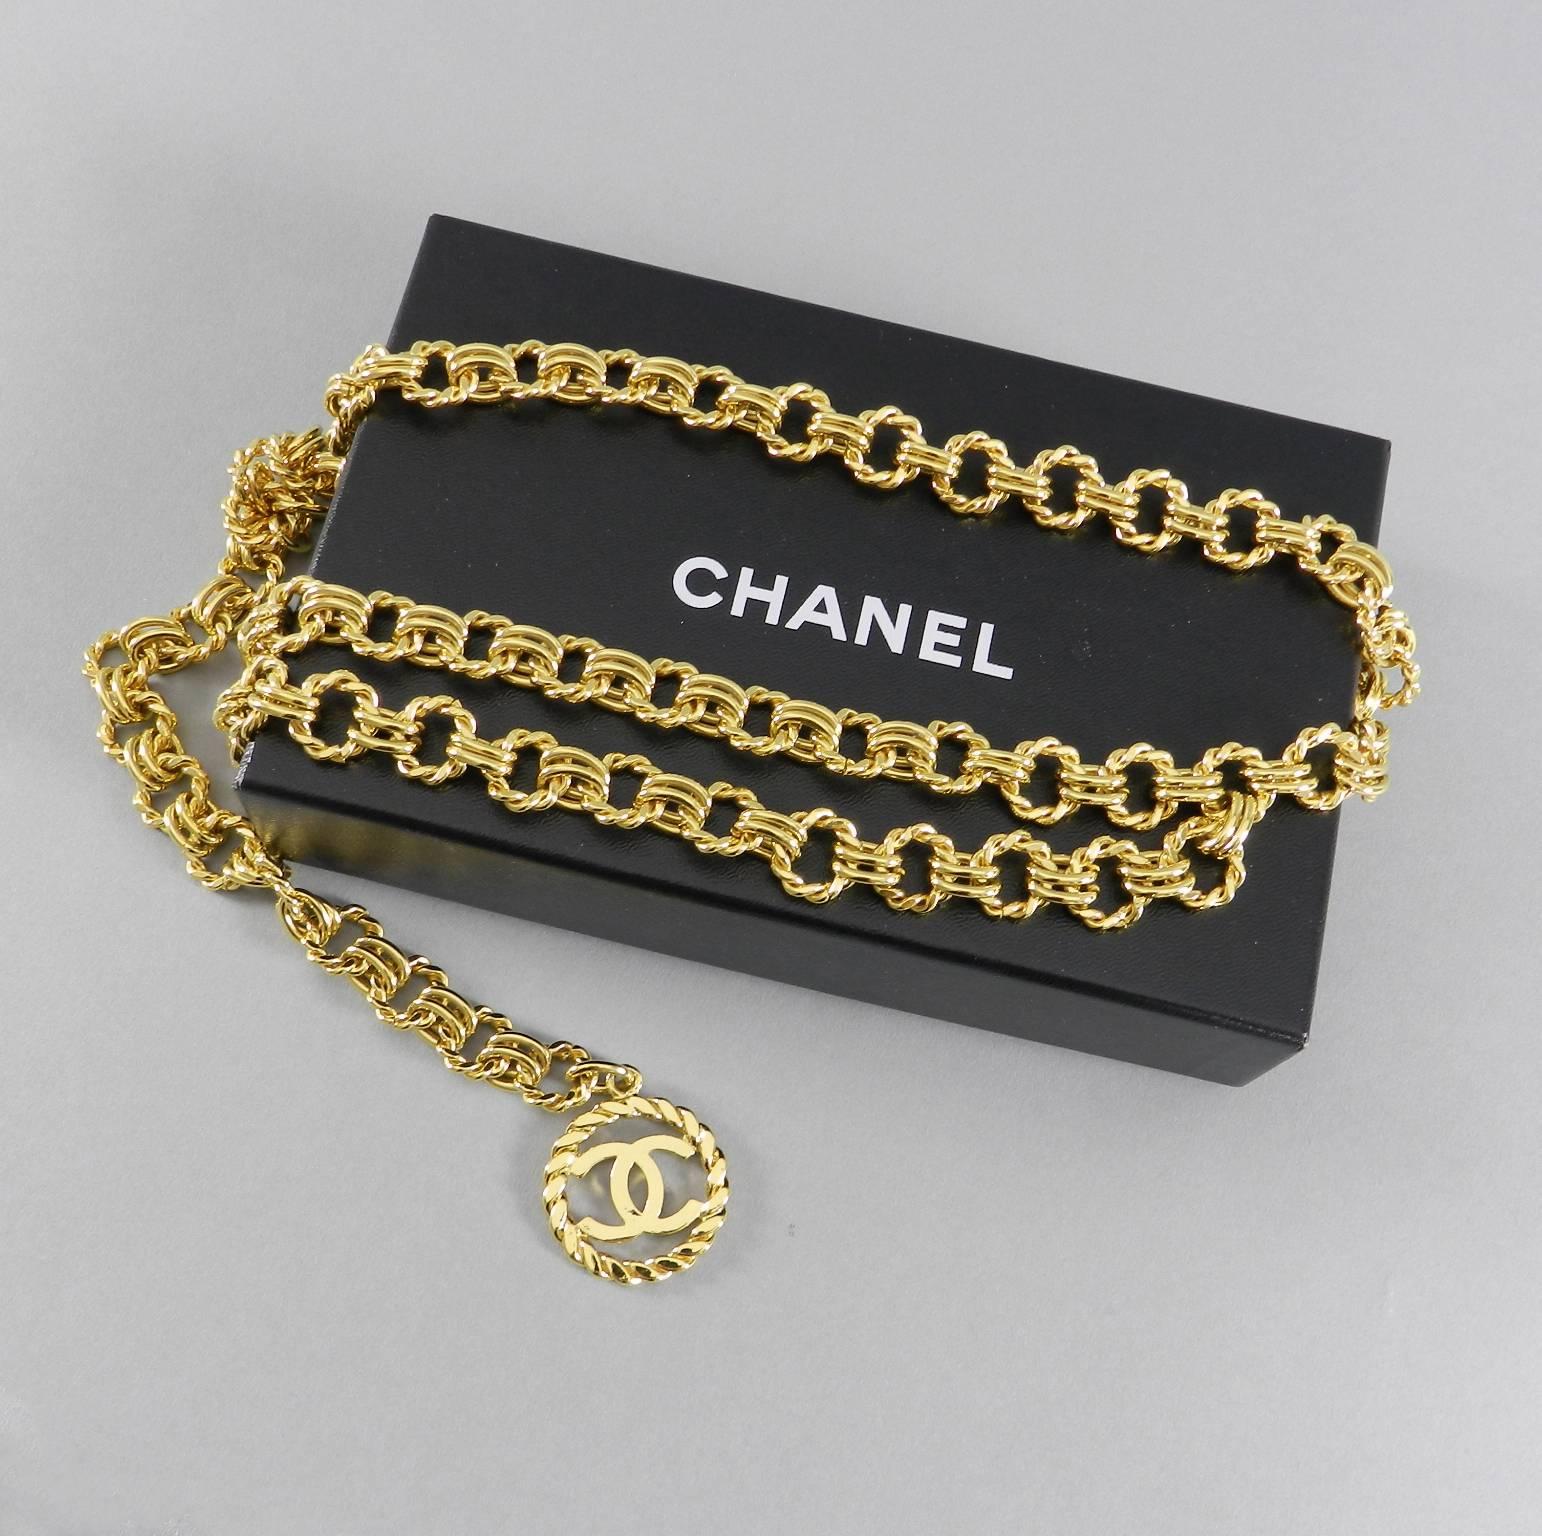 Chanel vintage 1991 gold chain belt.  Large CC logo medallion drop. Signed Chanel and season code 26 (1991) on small metal tab. Looks to be unworn and stored. Excellent shiny clean condition - like new. Fastens with hook anywhere along the 36"